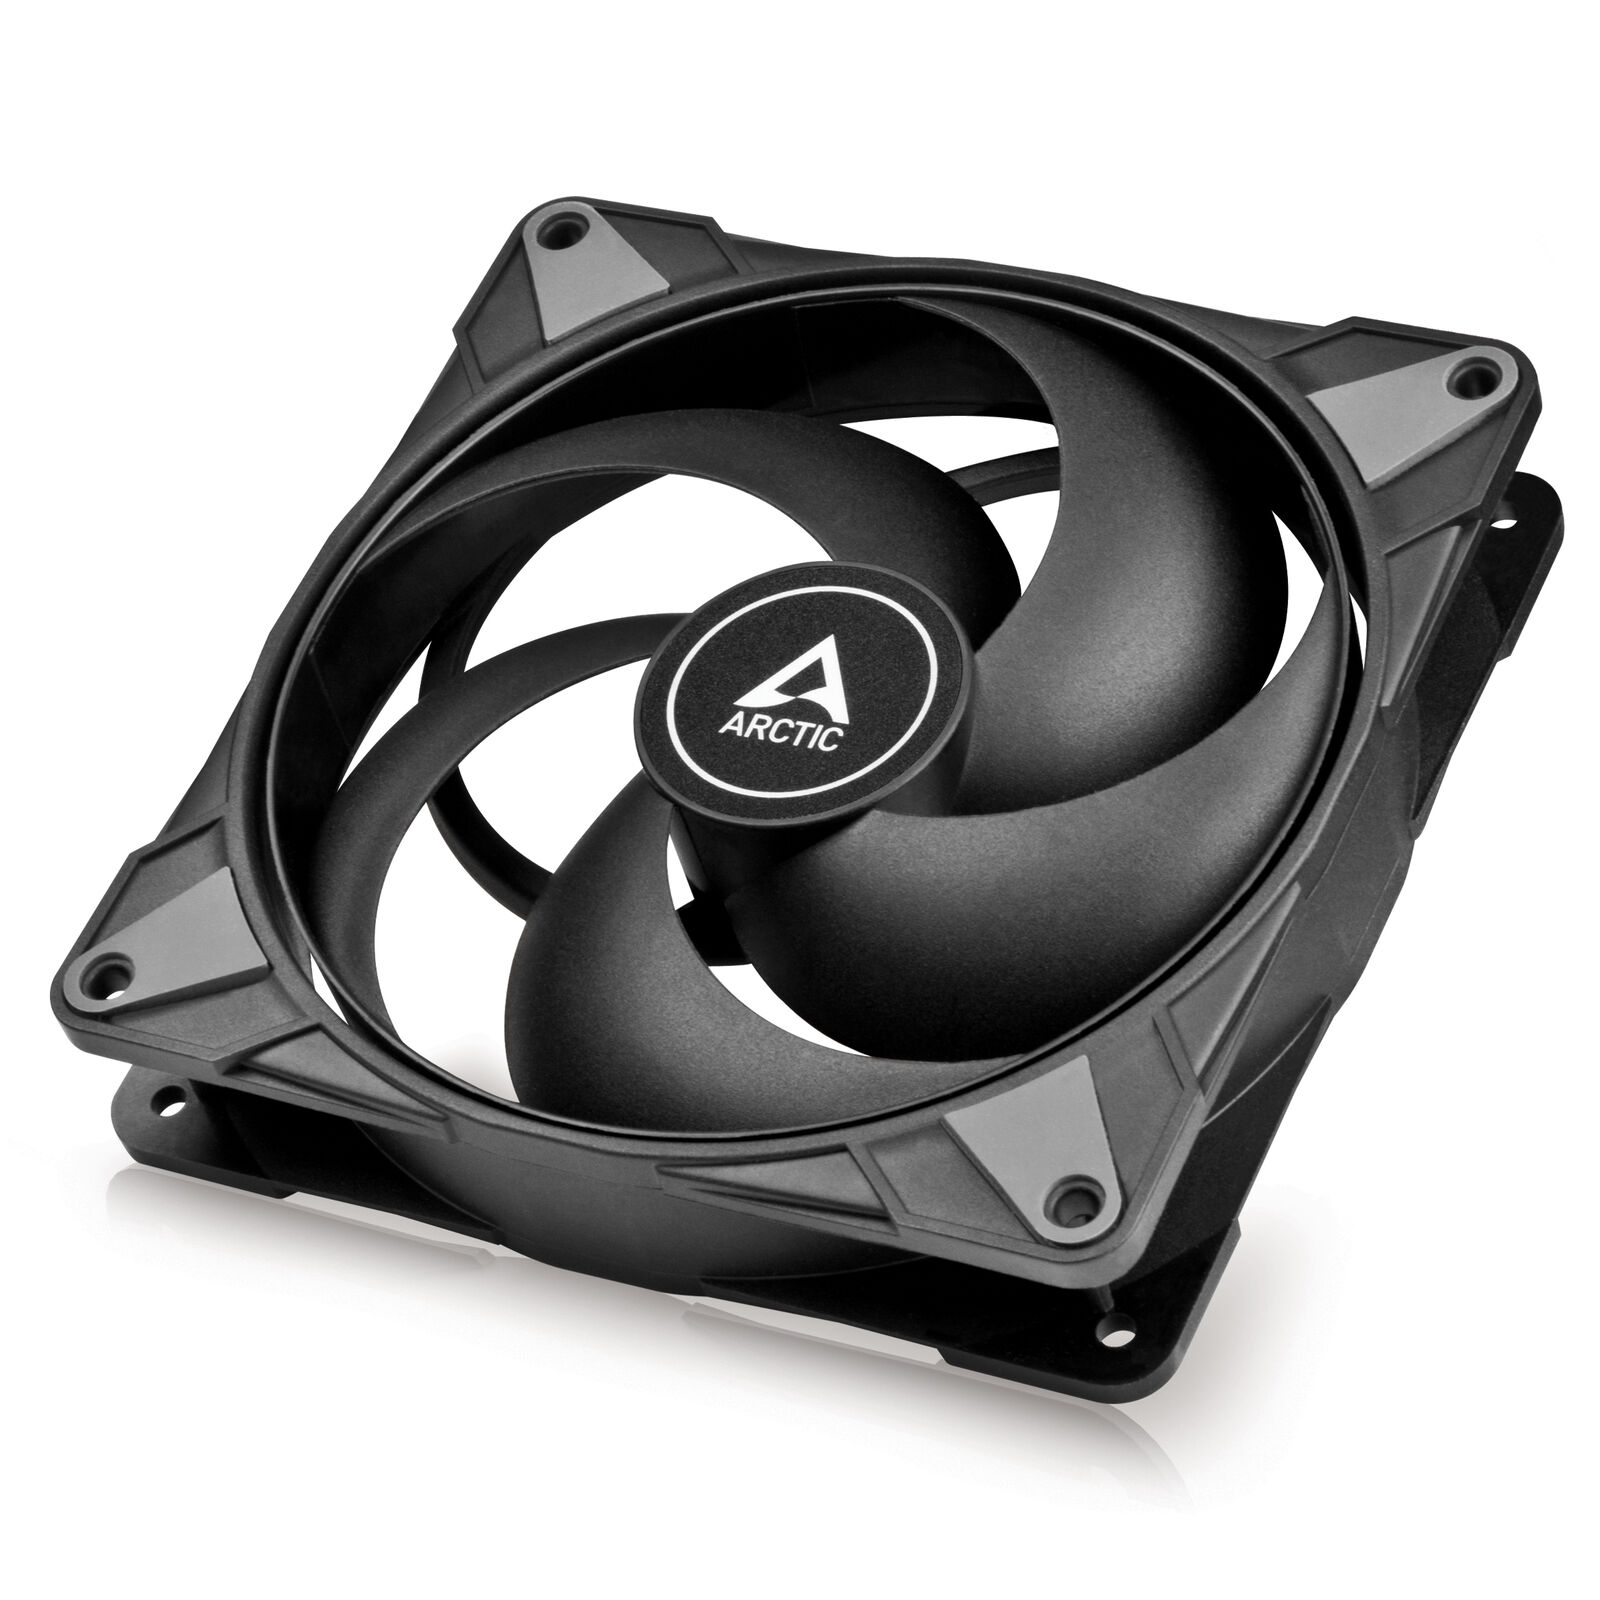 ARCTIC P14 Max PC Case Fan High-Performance 140 mm PWM controlled 400-2800 rpm